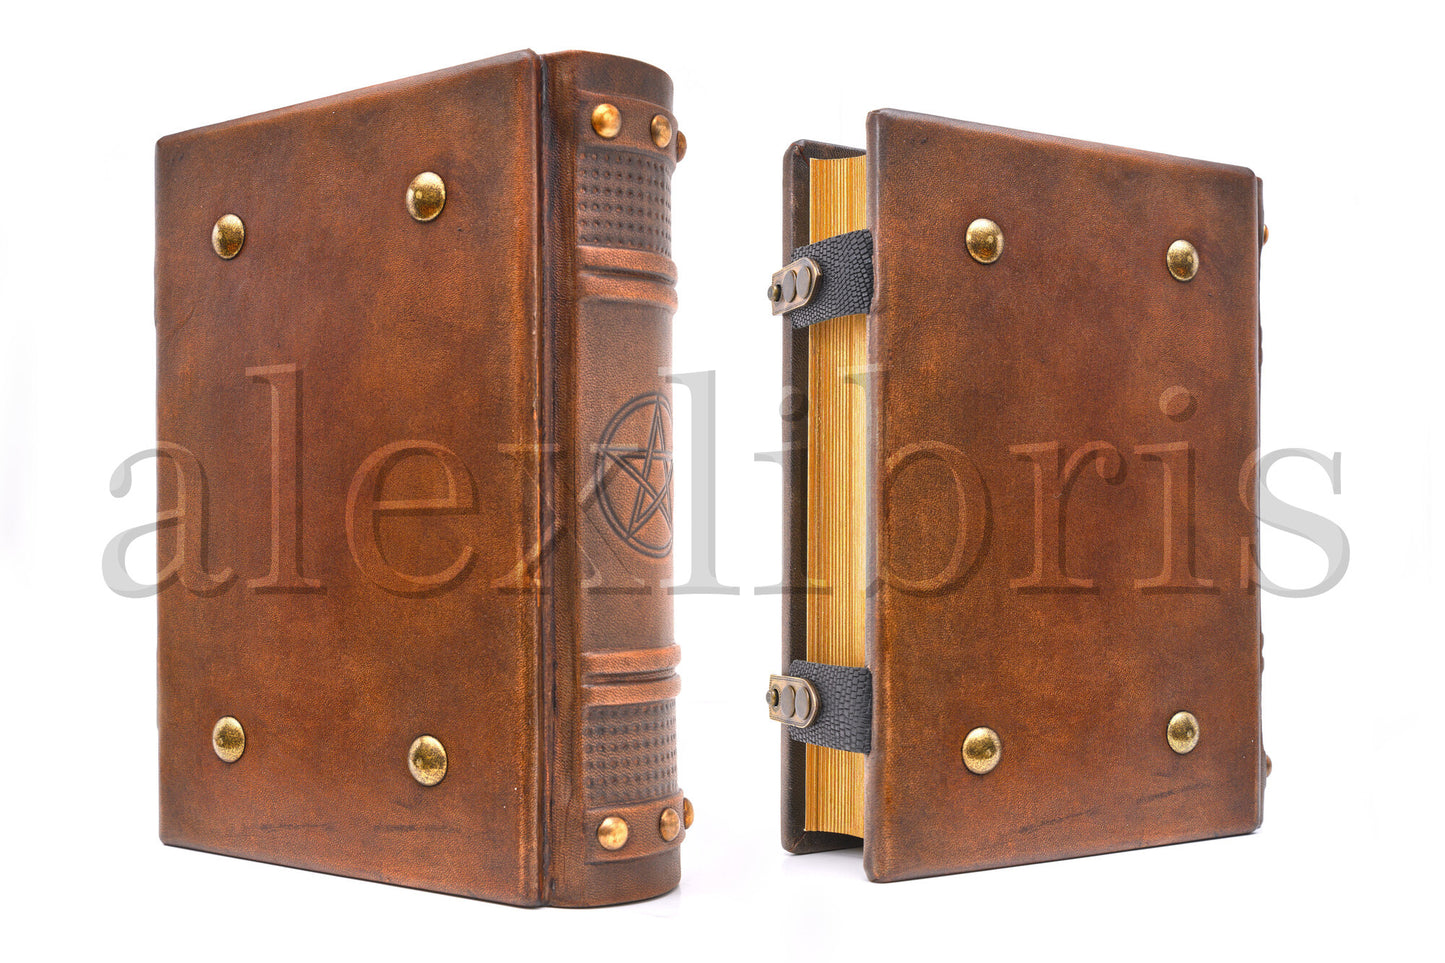 Alchemy Leather Journal: Large 7.5 x 10 Inches, 600 Blank Pages - Unleash your Inner Alchemist with this Antiqued Leather Journal